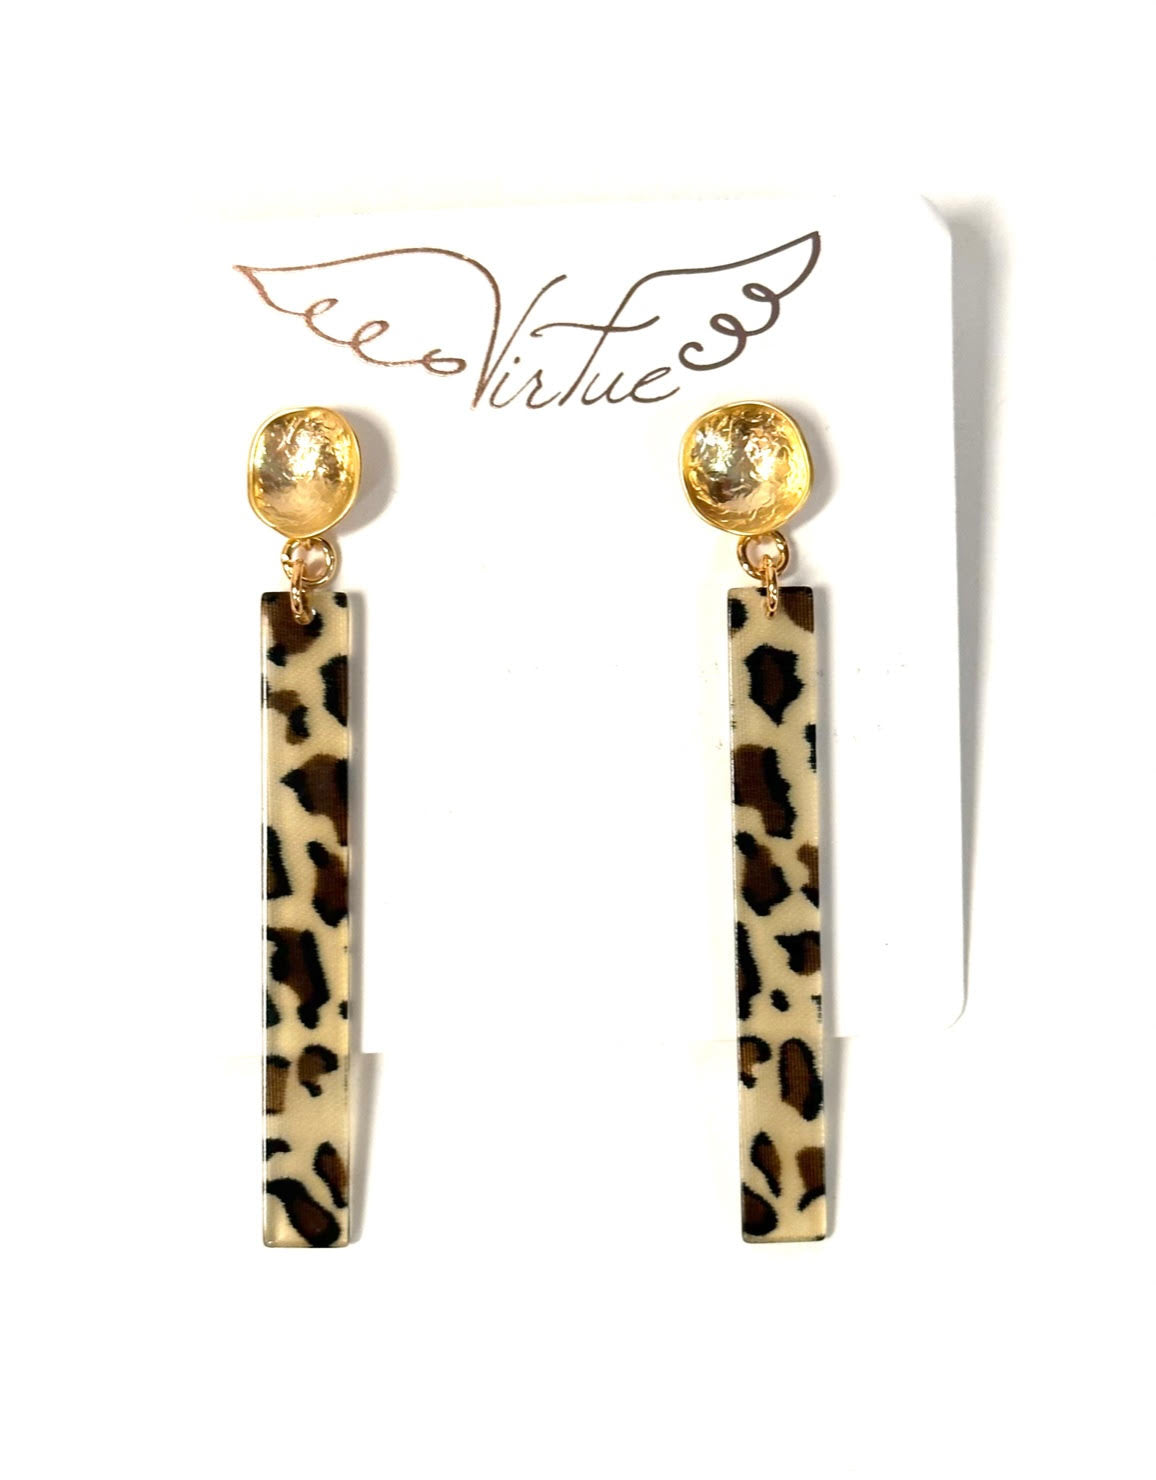 Acrylic Bar on Round Hammered Post Earring in leopard by Virtue